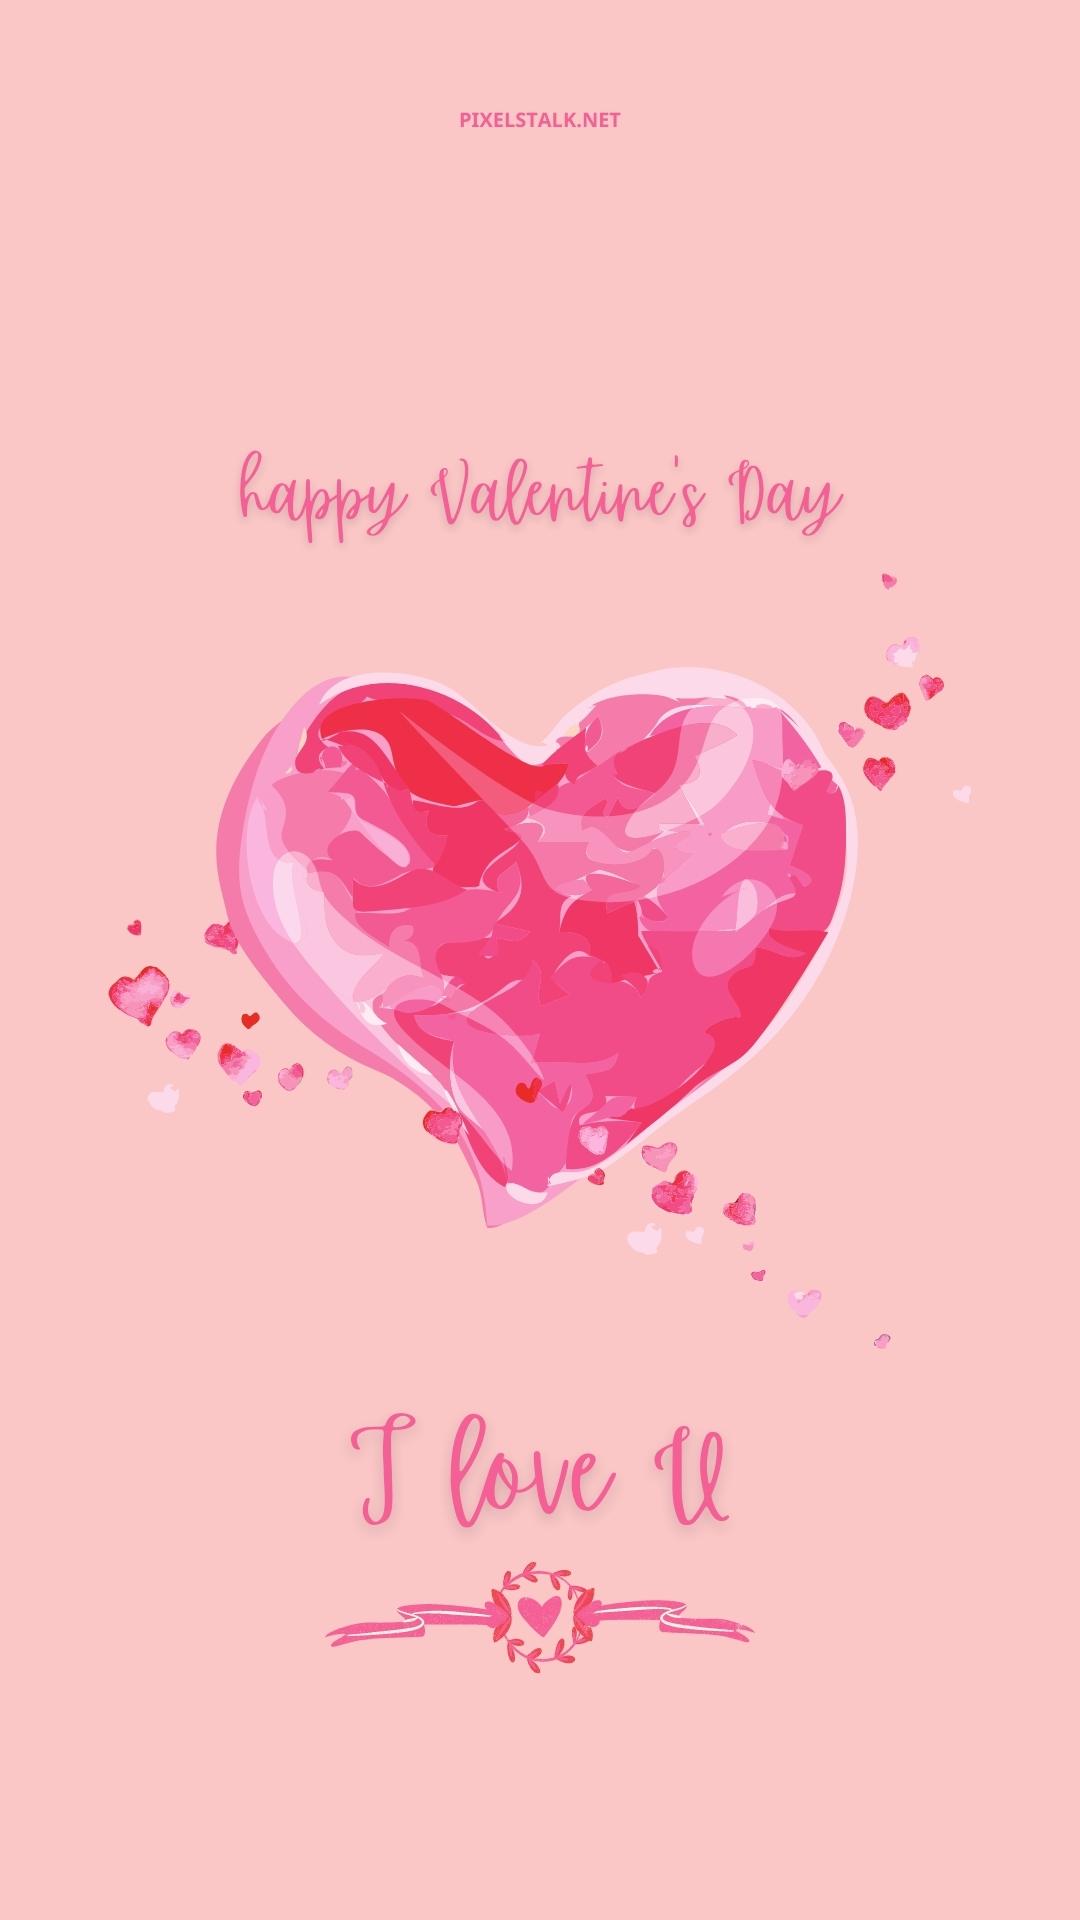 Happy Valentines Day iPhone Wallpaper HD  iPhone Wallpapers